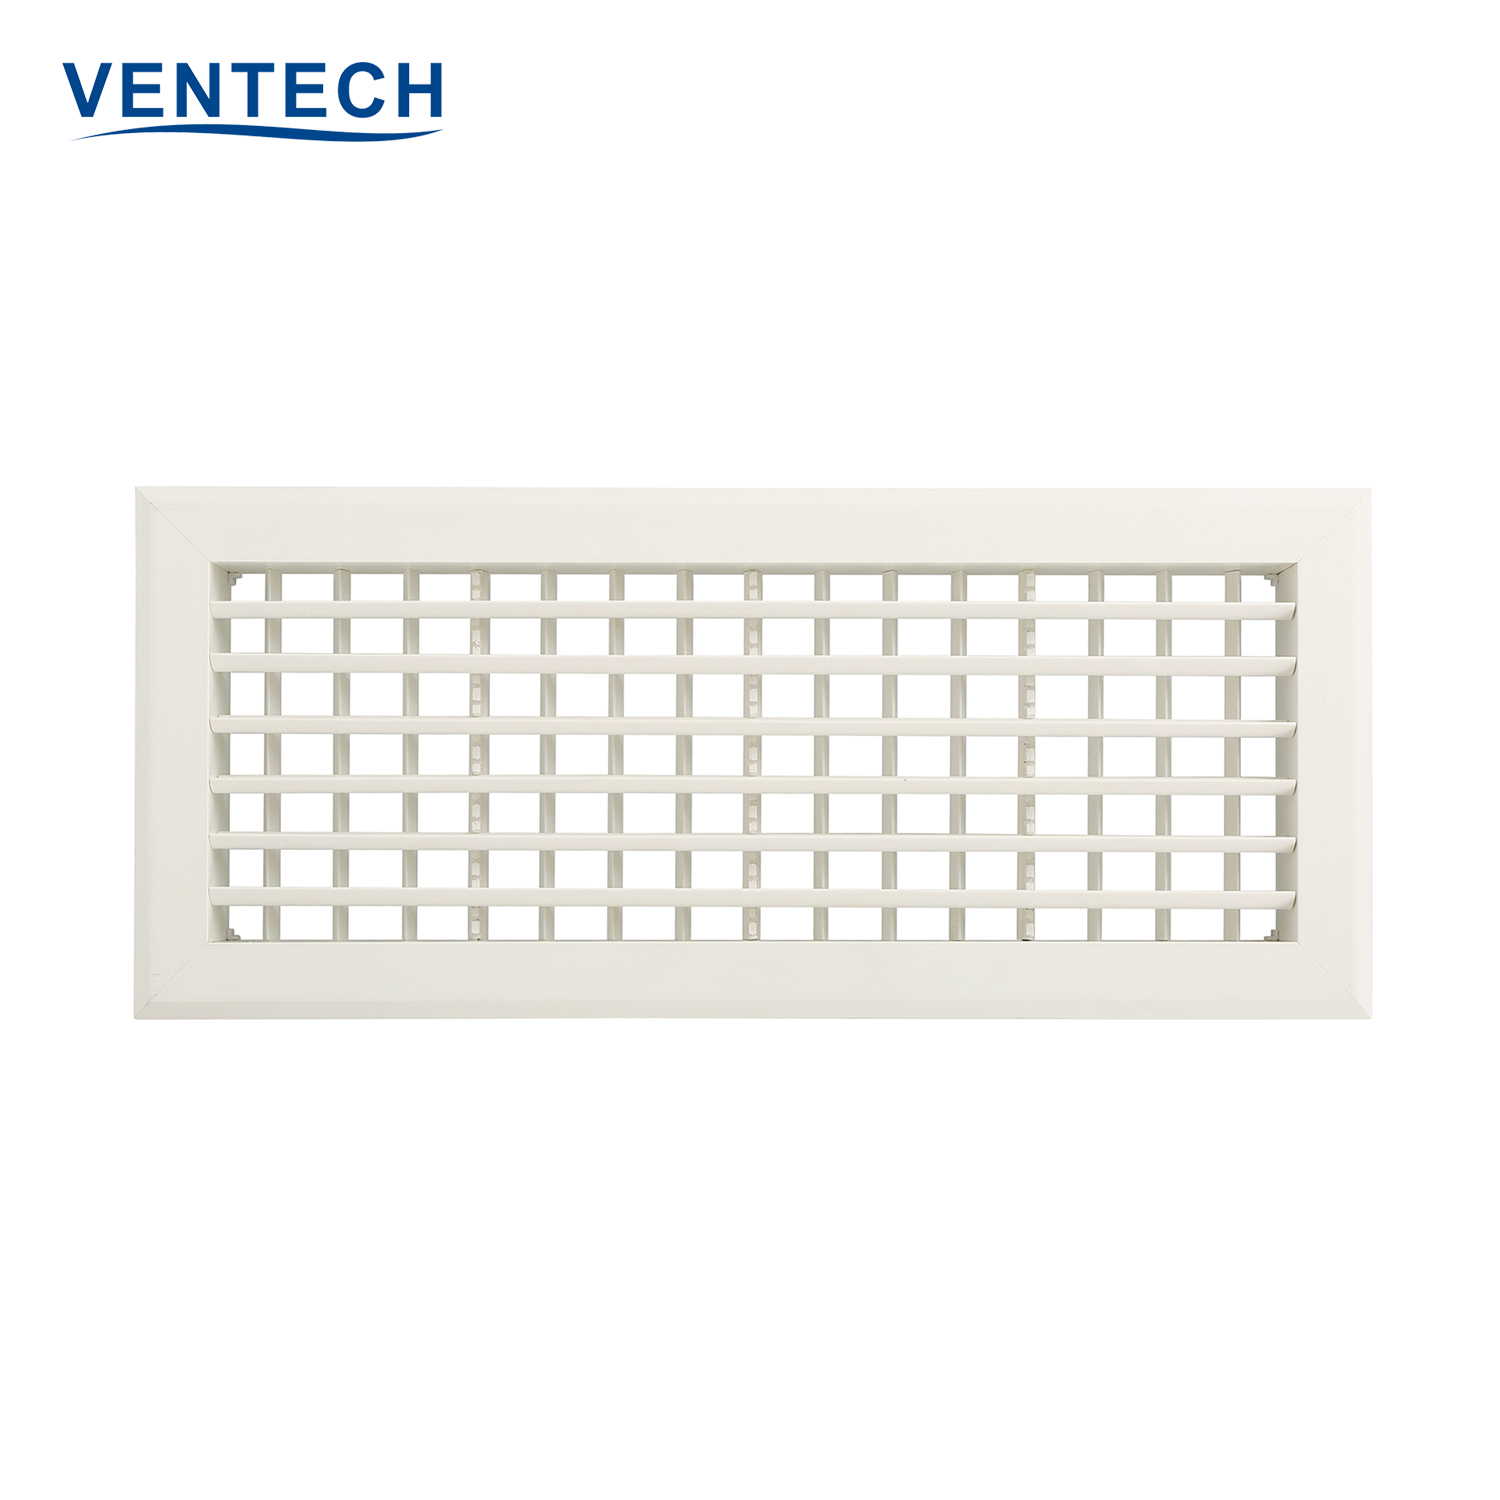 Ventech door grille manufacturer for air conditioning-1